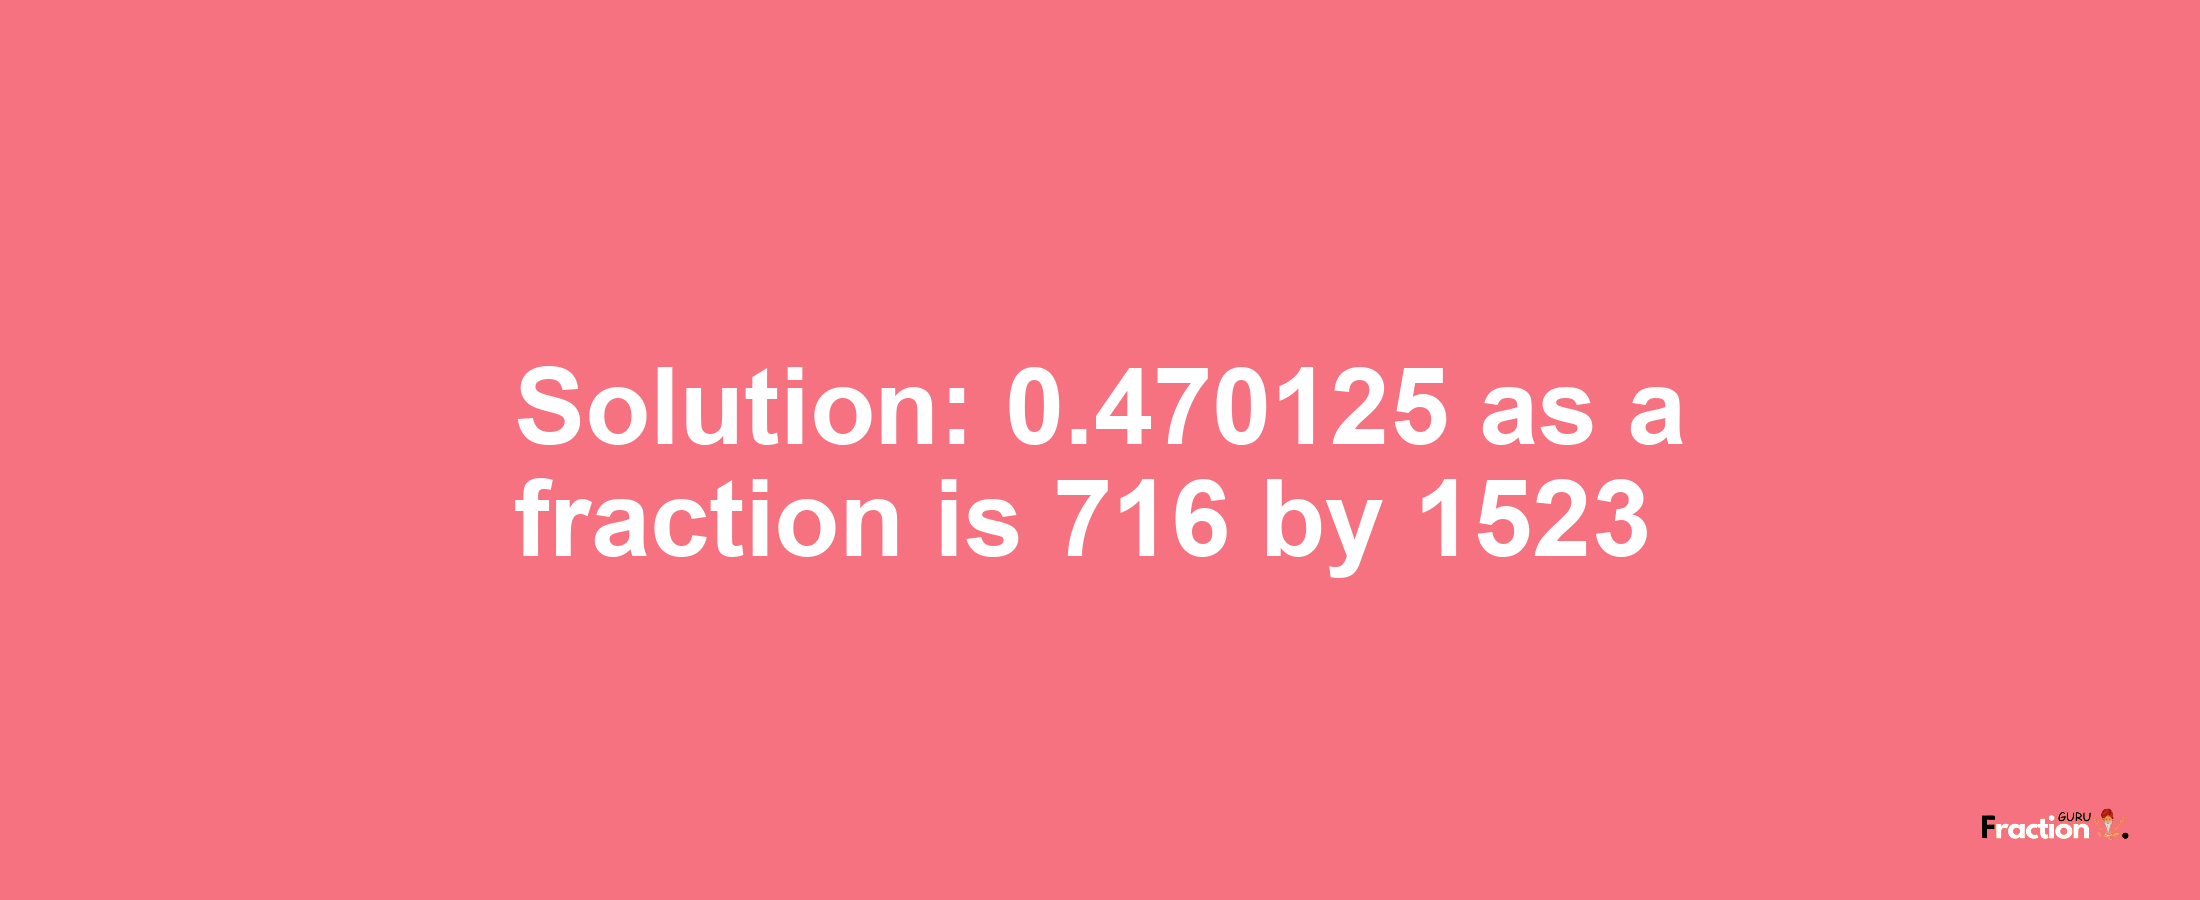 Solution:0.470125 as a fraction is 716/1523